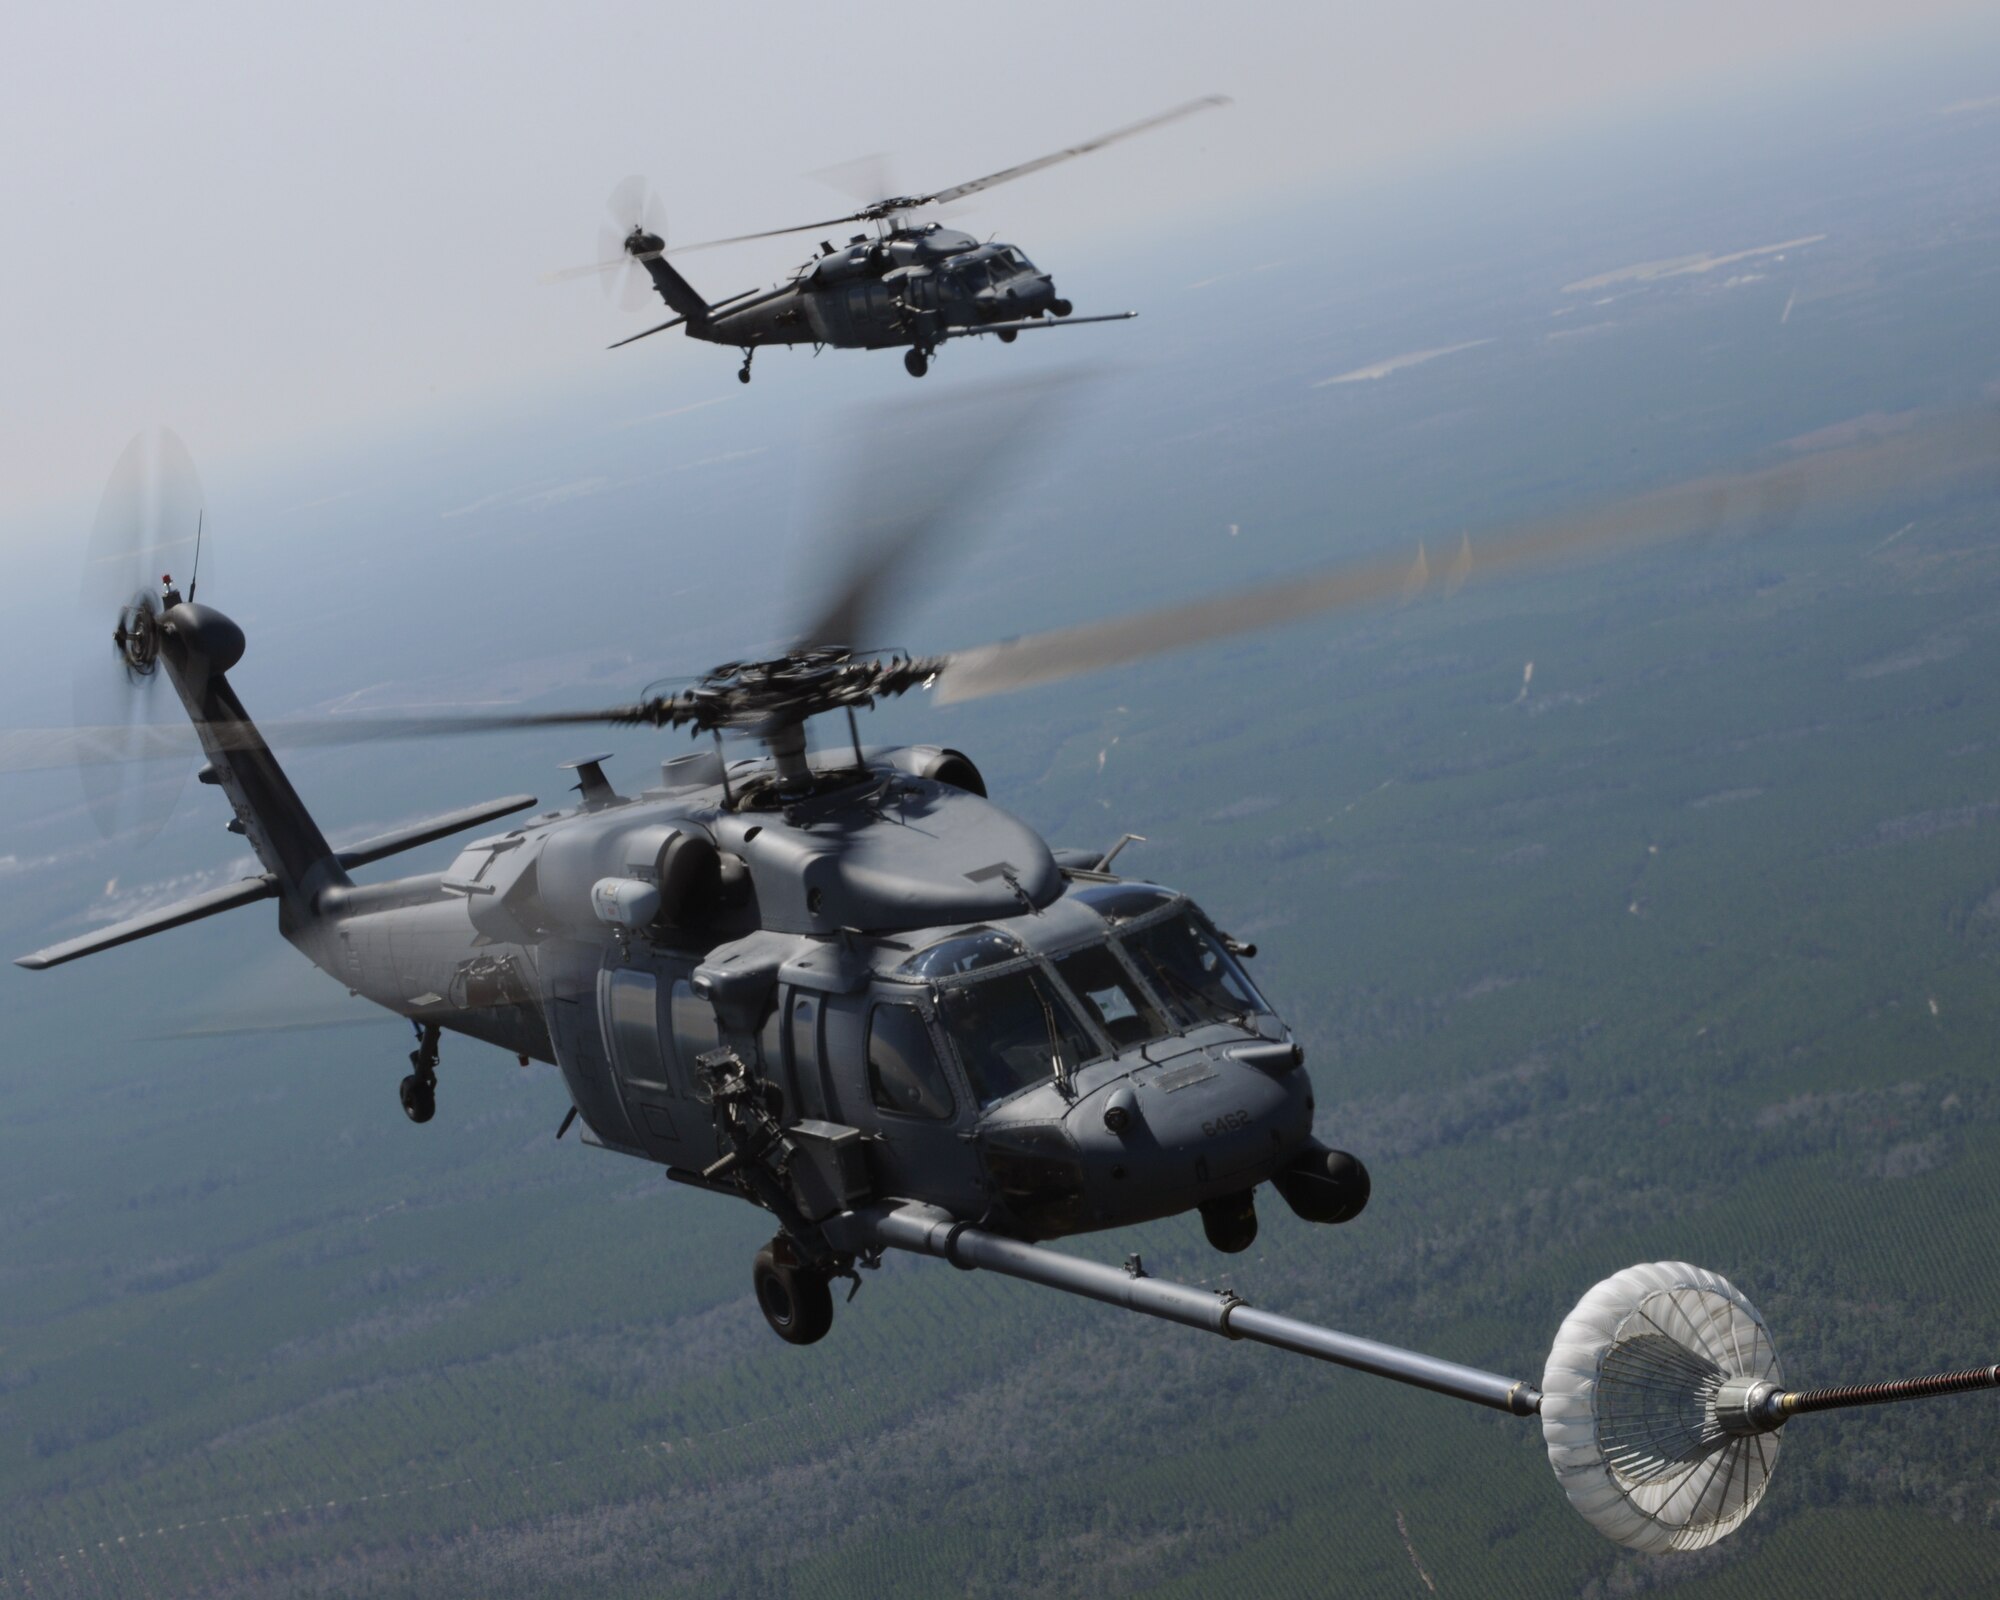 MOODY AIR FORCE BASE, Ga. -- An HH-60G Pave Hawk from the 41st Rescue Squadron prepares to refuel while in-flight as another HH-60G remains in an observation position here March 16. Both were refueled by a HC-130P/N Combat King from the 71st Rescue Squadron during a flight training session. The Combat King is capable of traveling up to 4,000 miles and carrying up to 73,000 pounds of fuel. (U.S. Air Force photo by Airman 1st Class Benjamin Wiseman/Released)